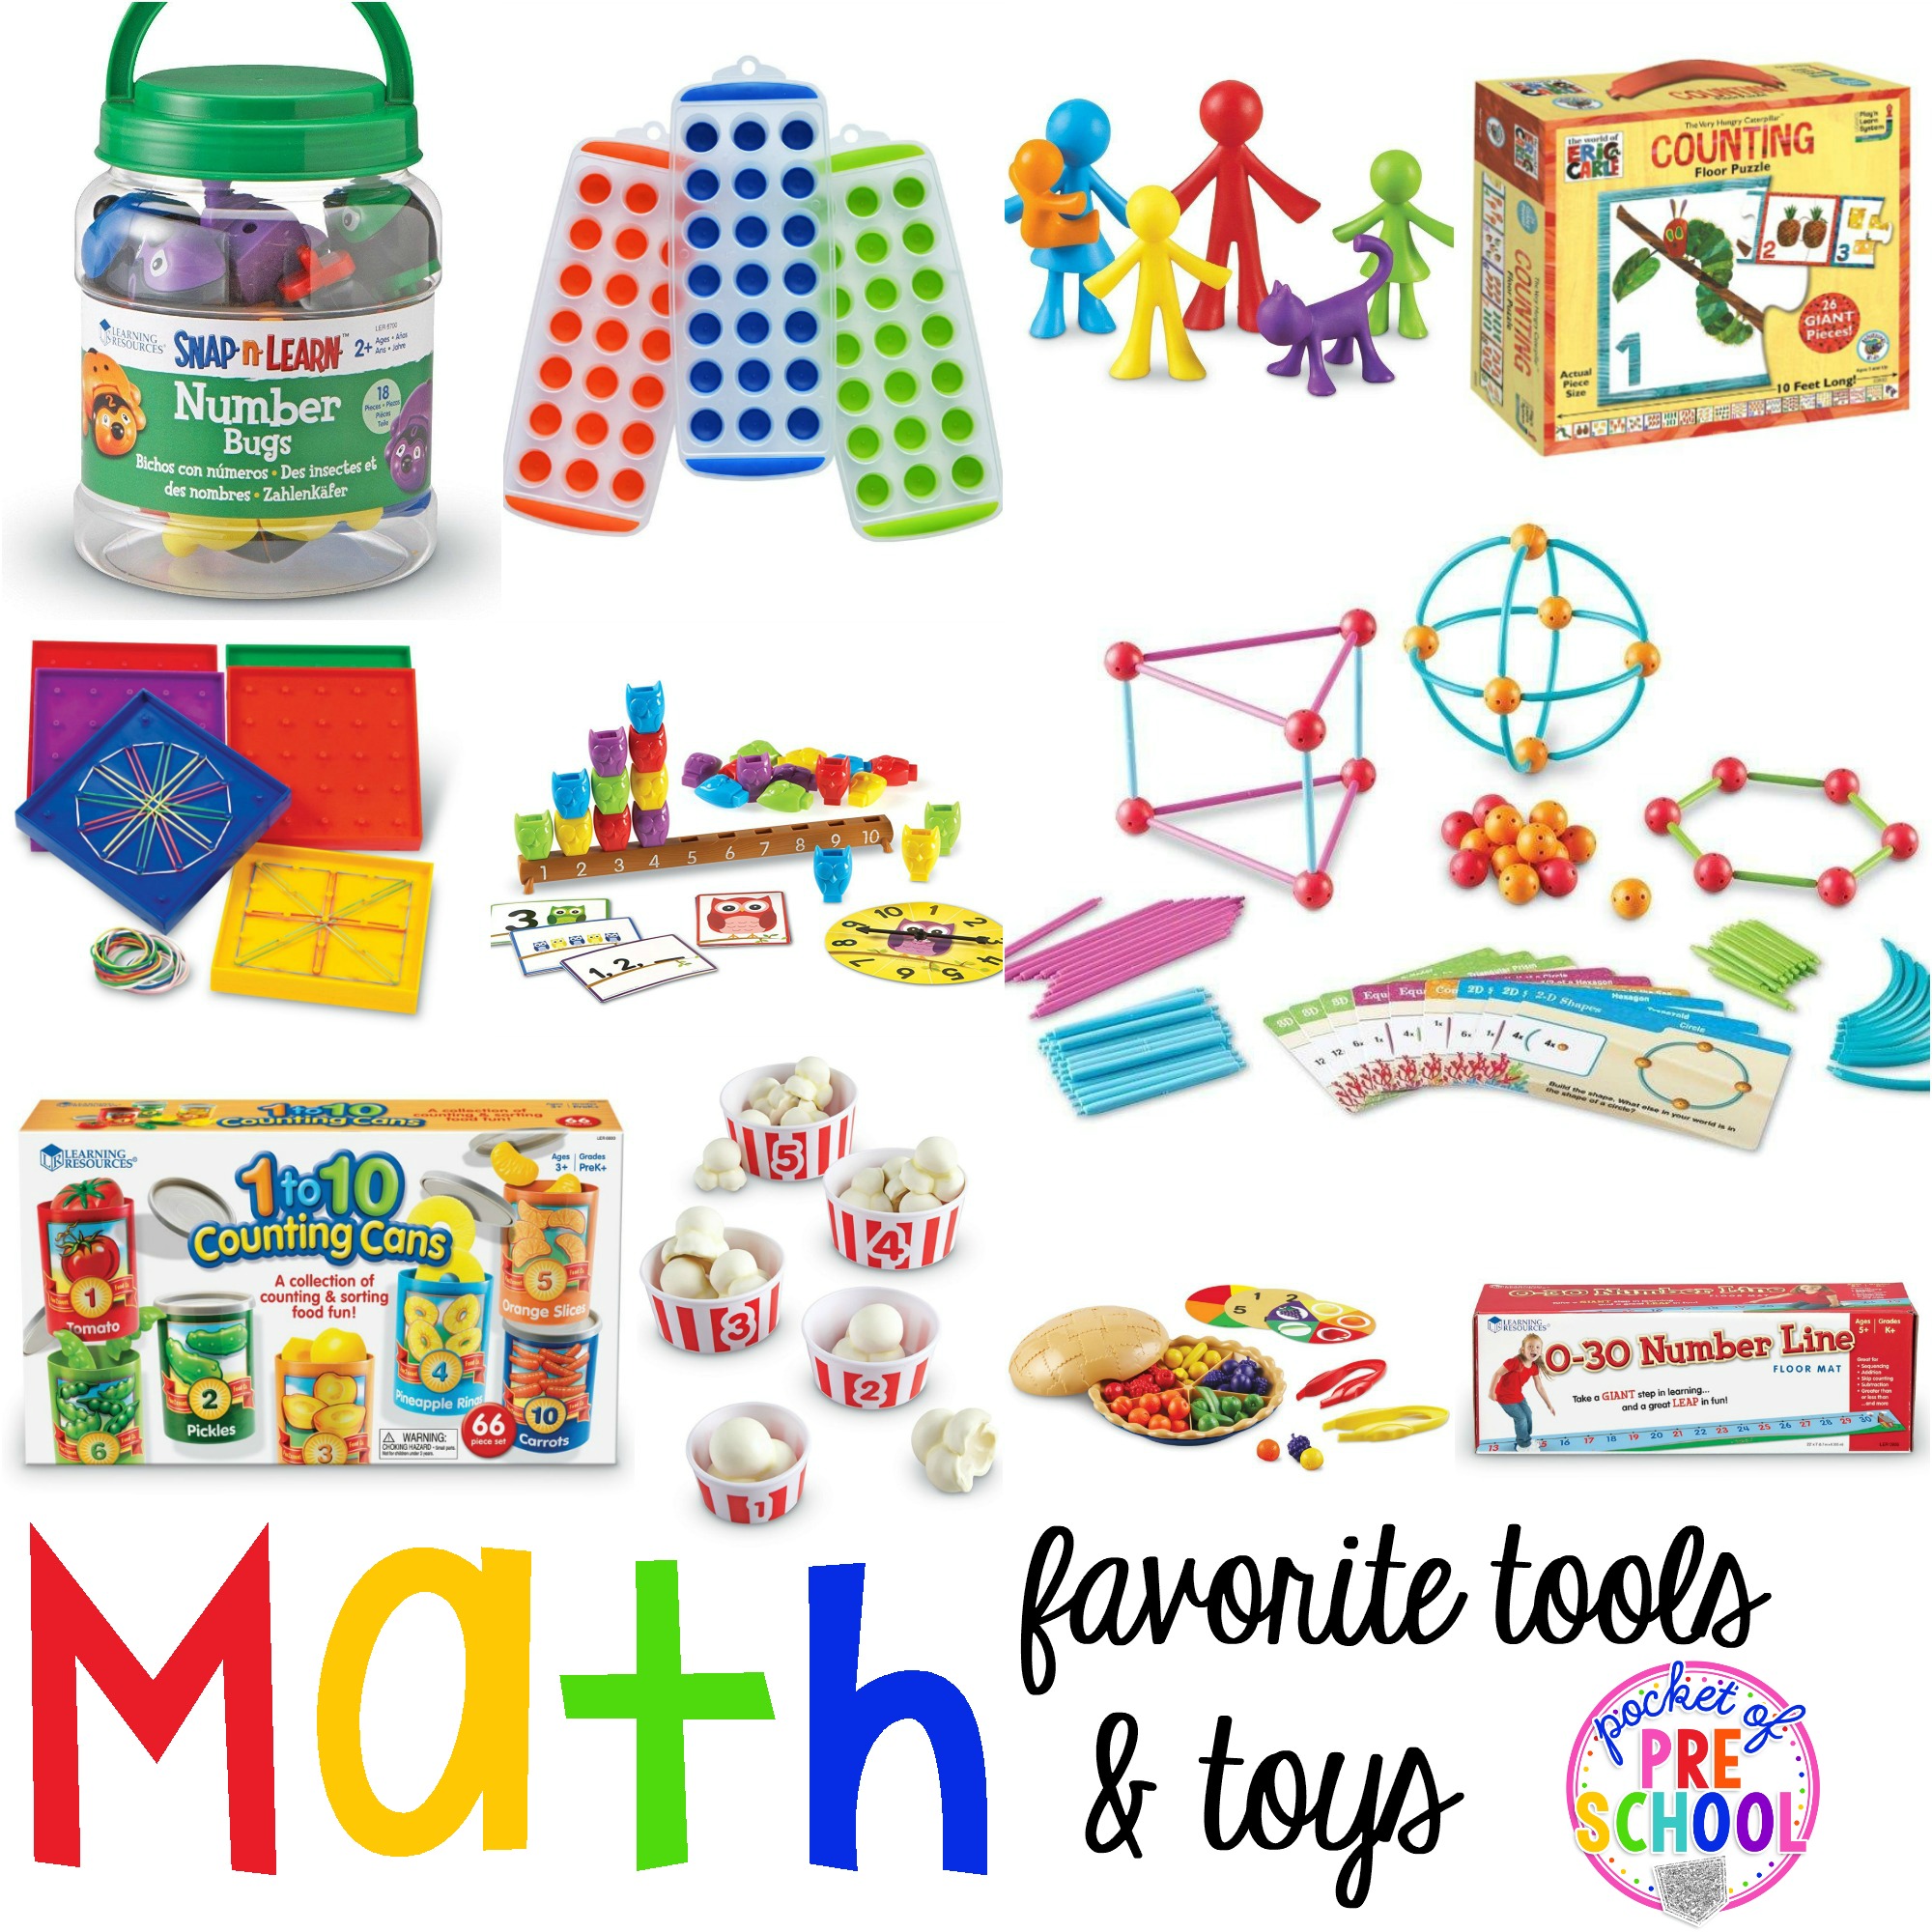 Favorite Math Toys and Tools for little learners (preschool, pre-k, and kindergarten)! Great for the classroom or home.